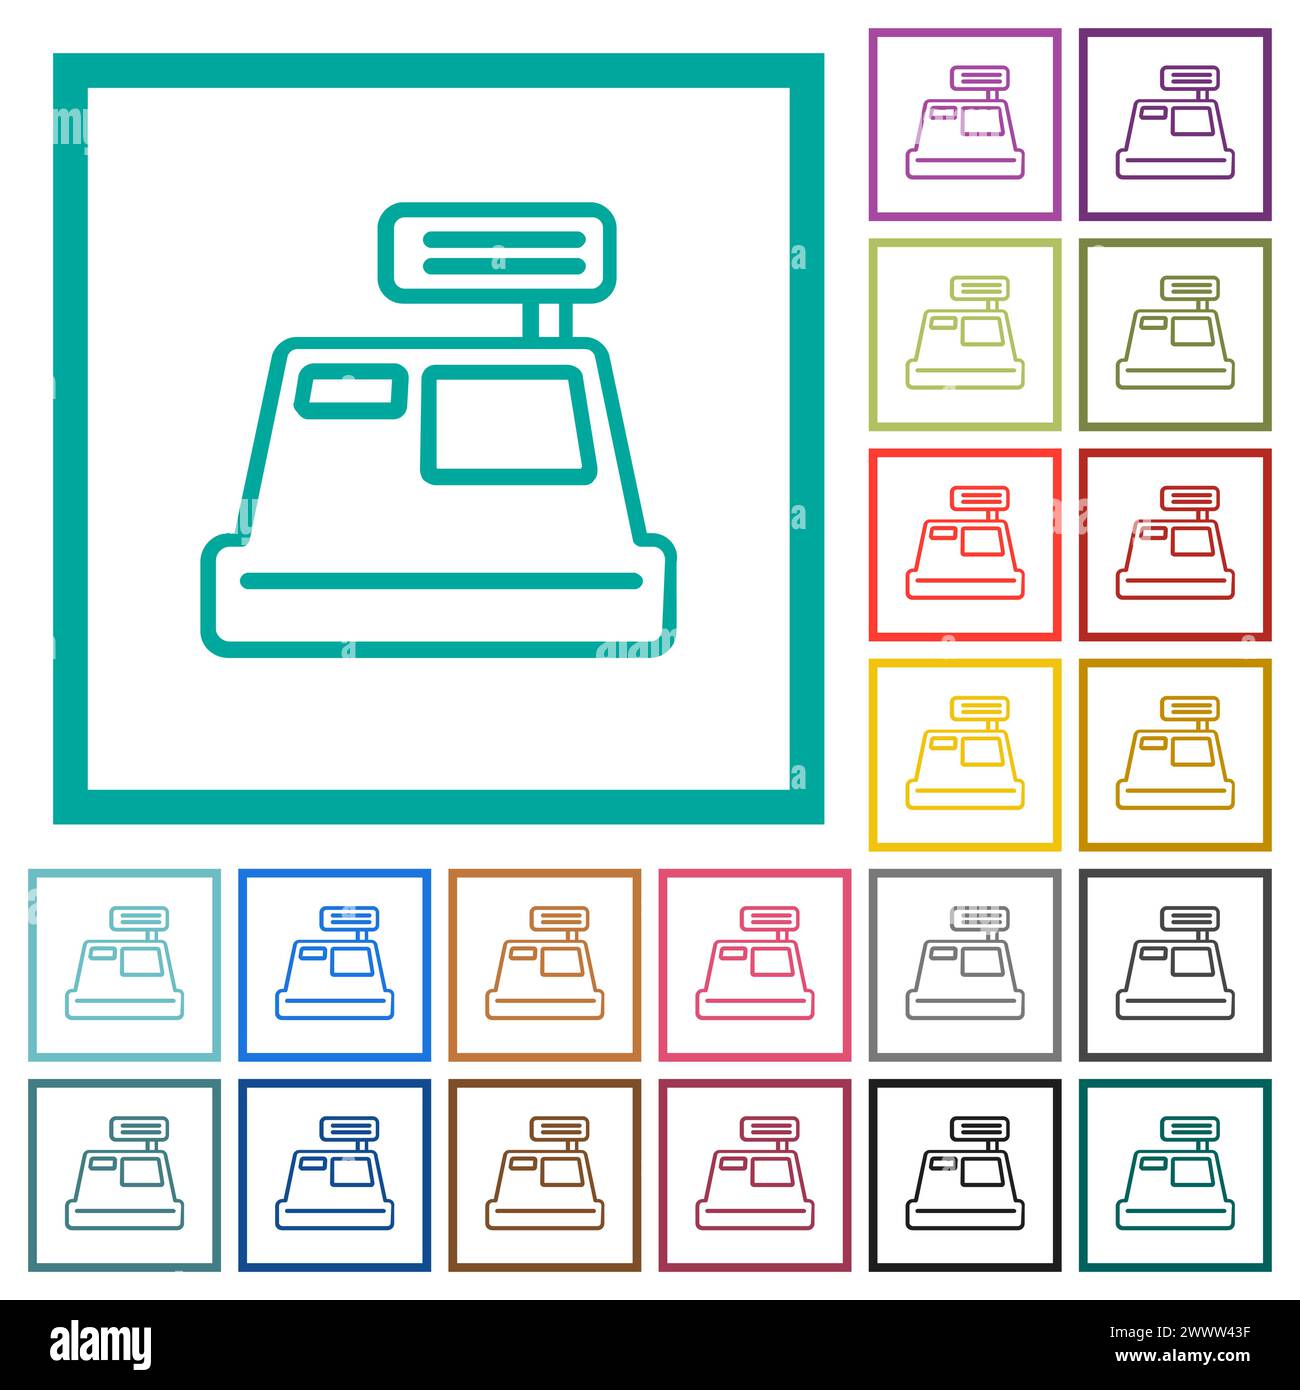 Cash register outline flat color icons with quadrant frames on white background Stock Vector